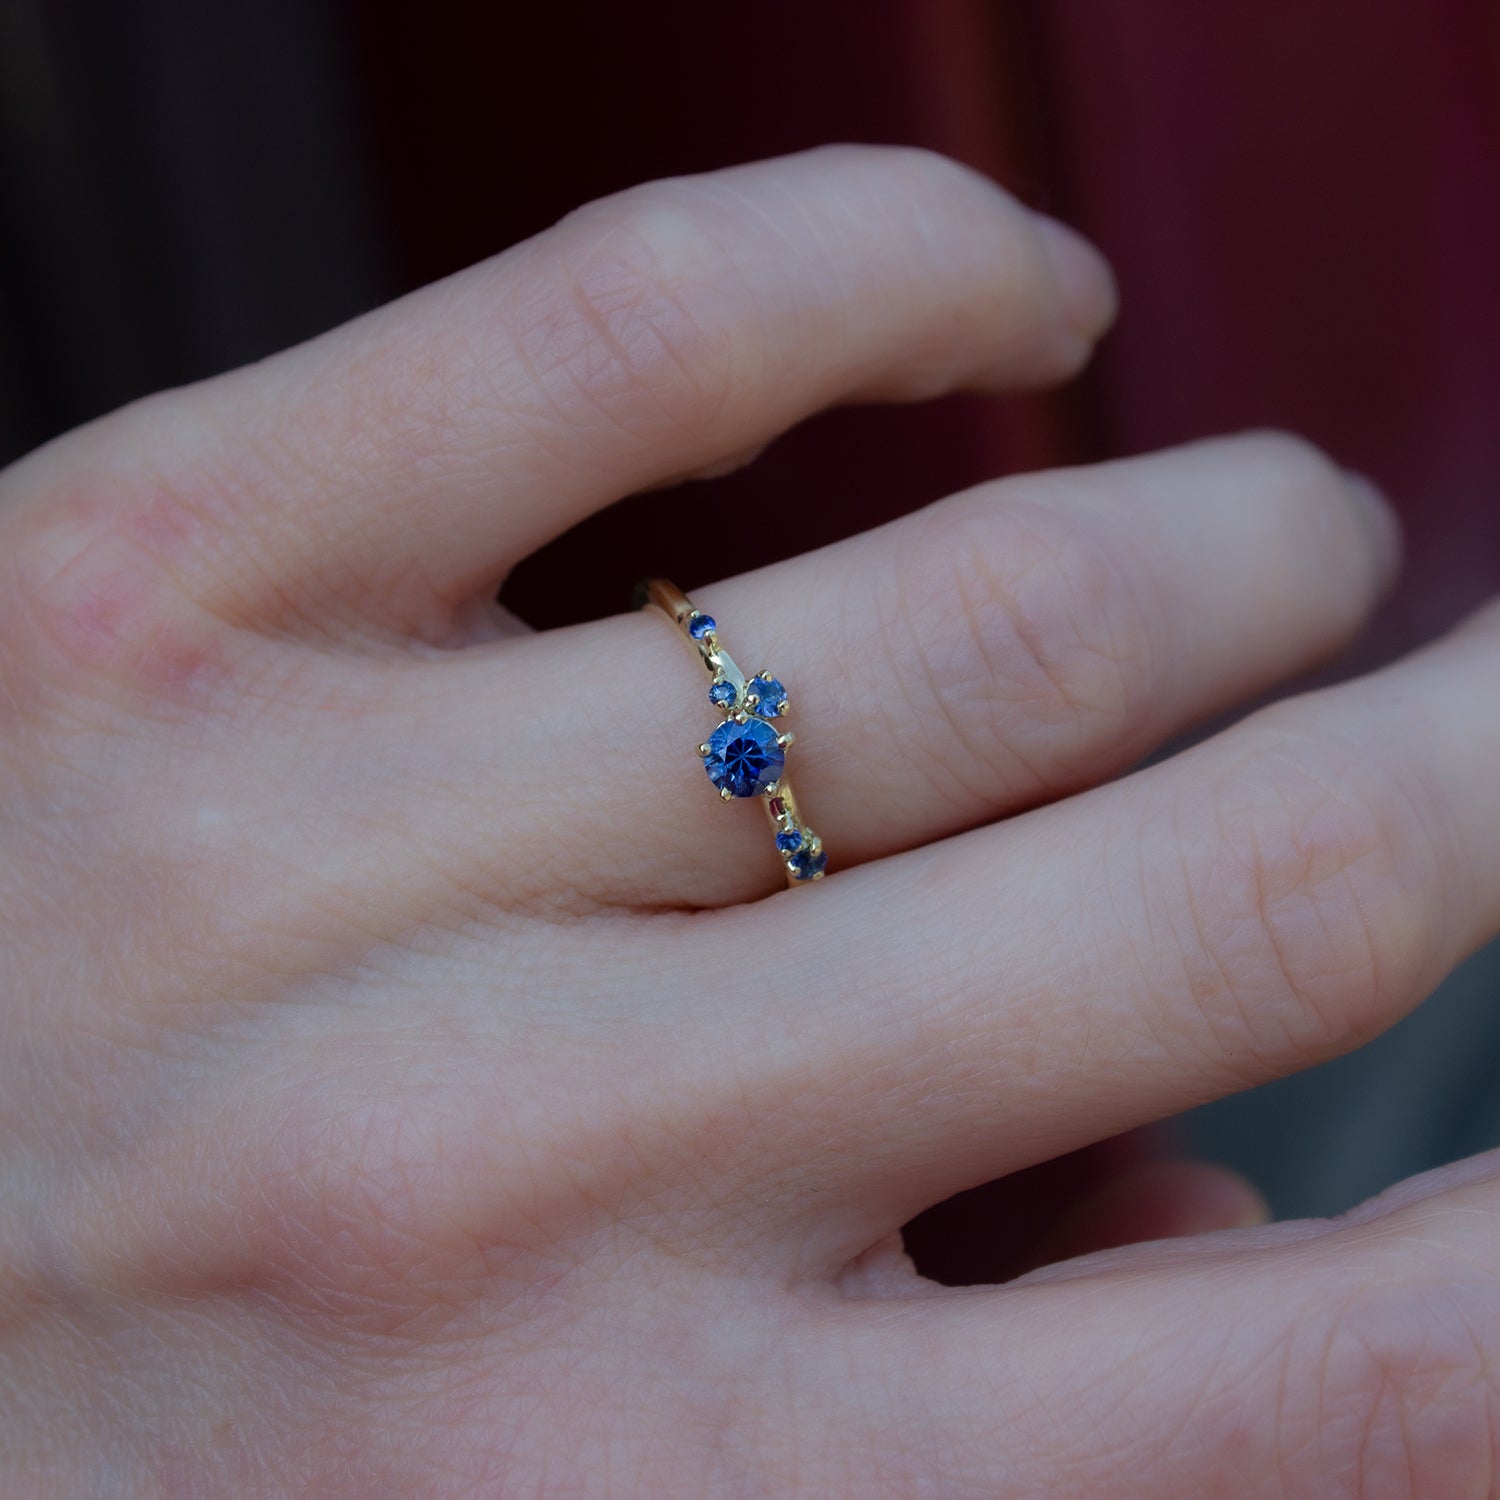 Beautful, delicate ring glimmering with cornflower blue sapphires gently scattered along the band.